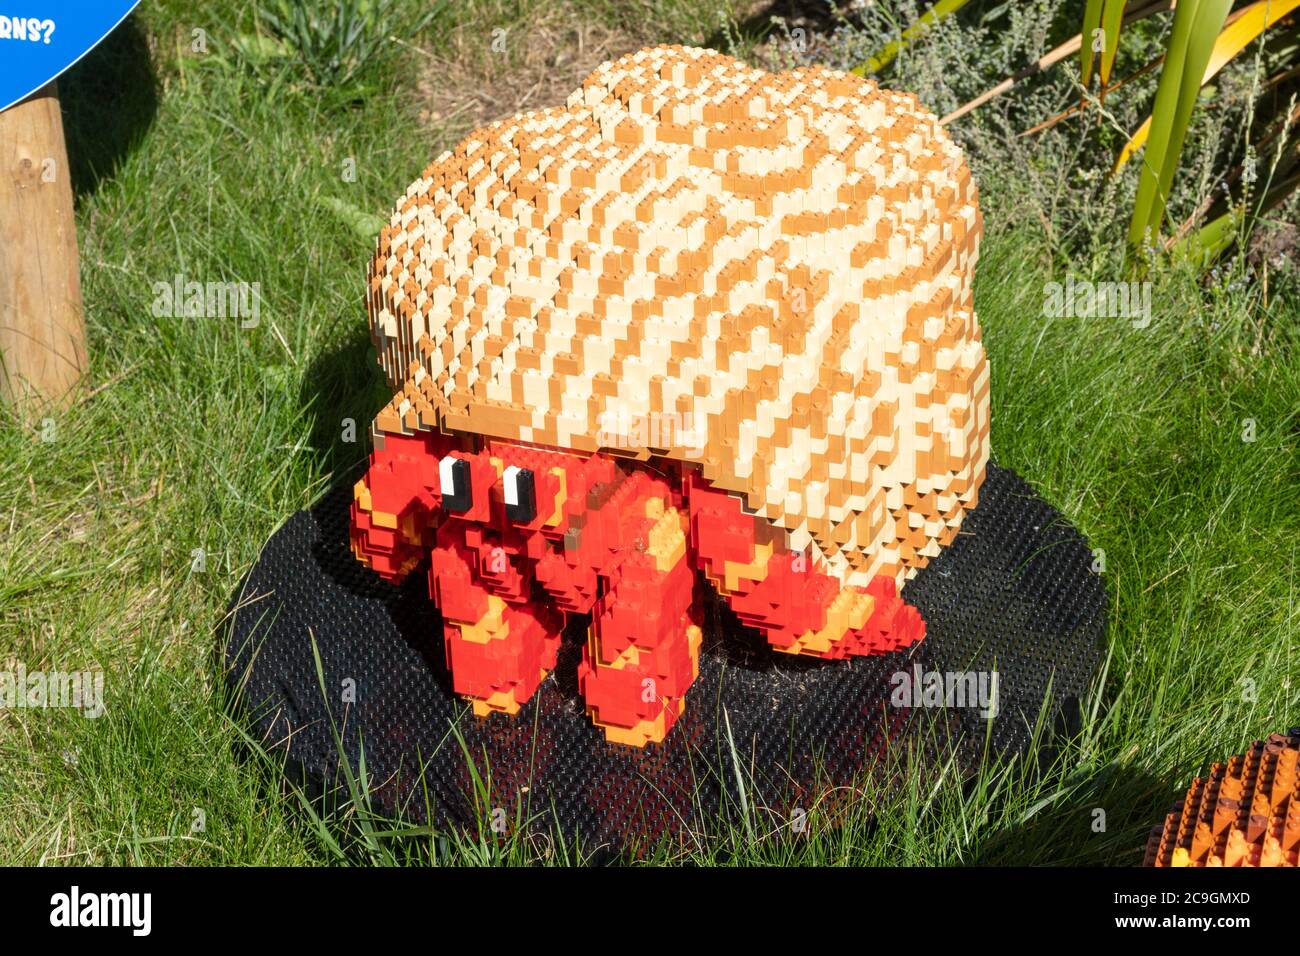 Supersized lego brick animal models at Marwell Zoo, UK, a childrens activity trail. A hermit crab model Stock Photo